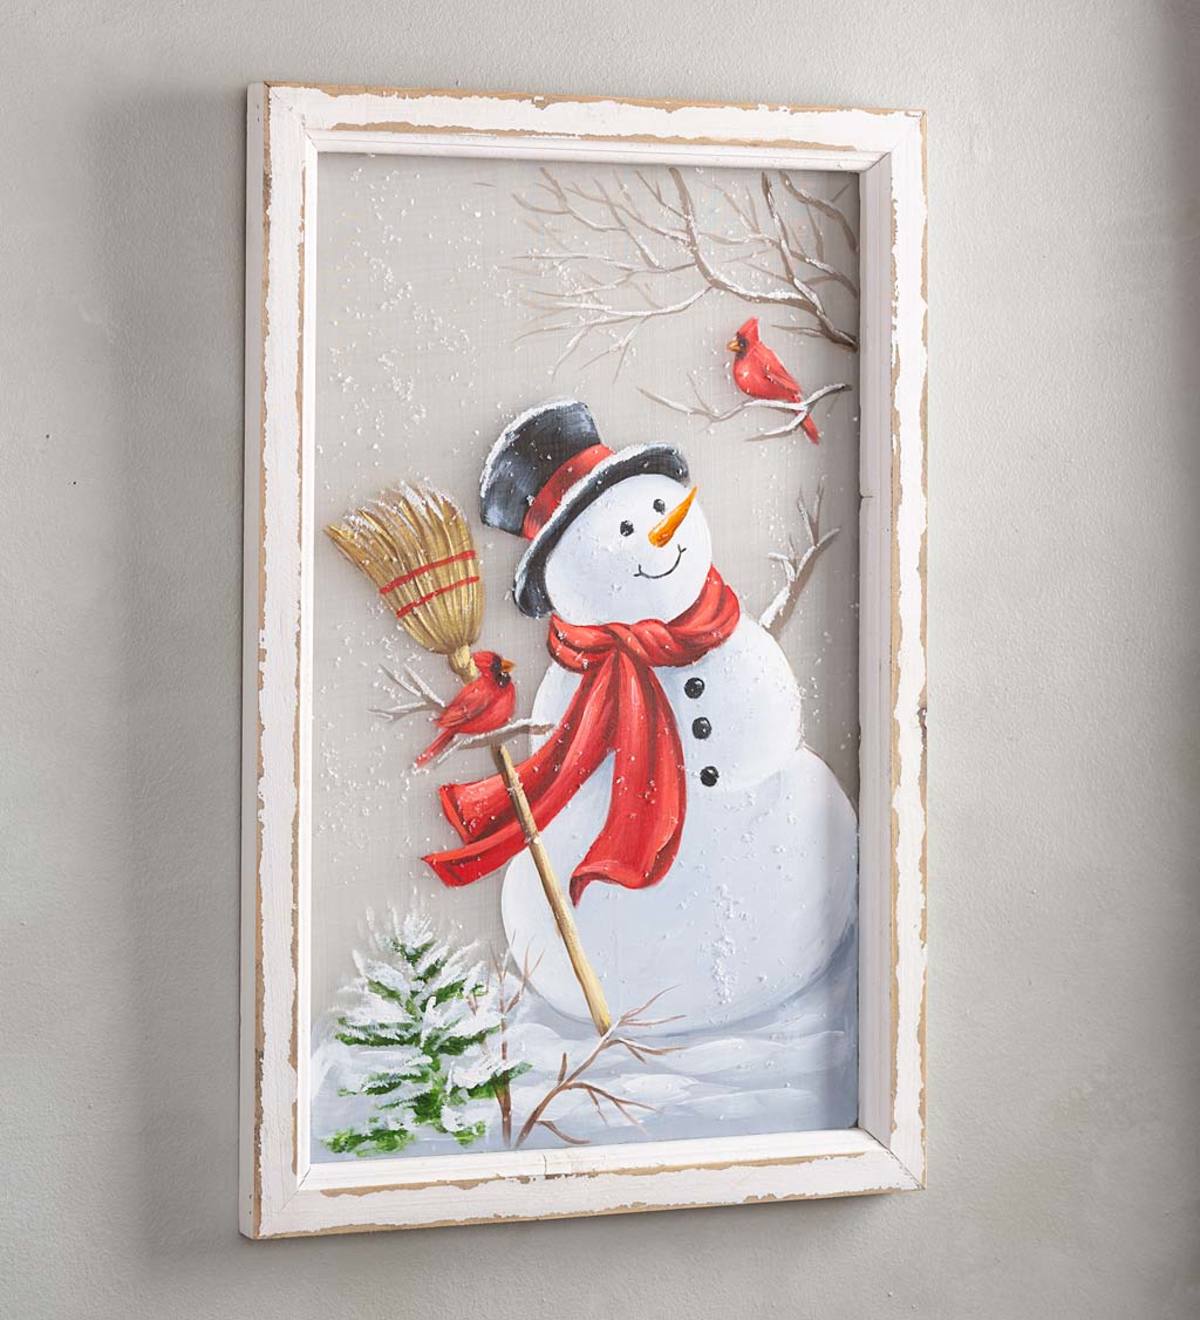 Hand-Painted Snowman with Broom Wall Art